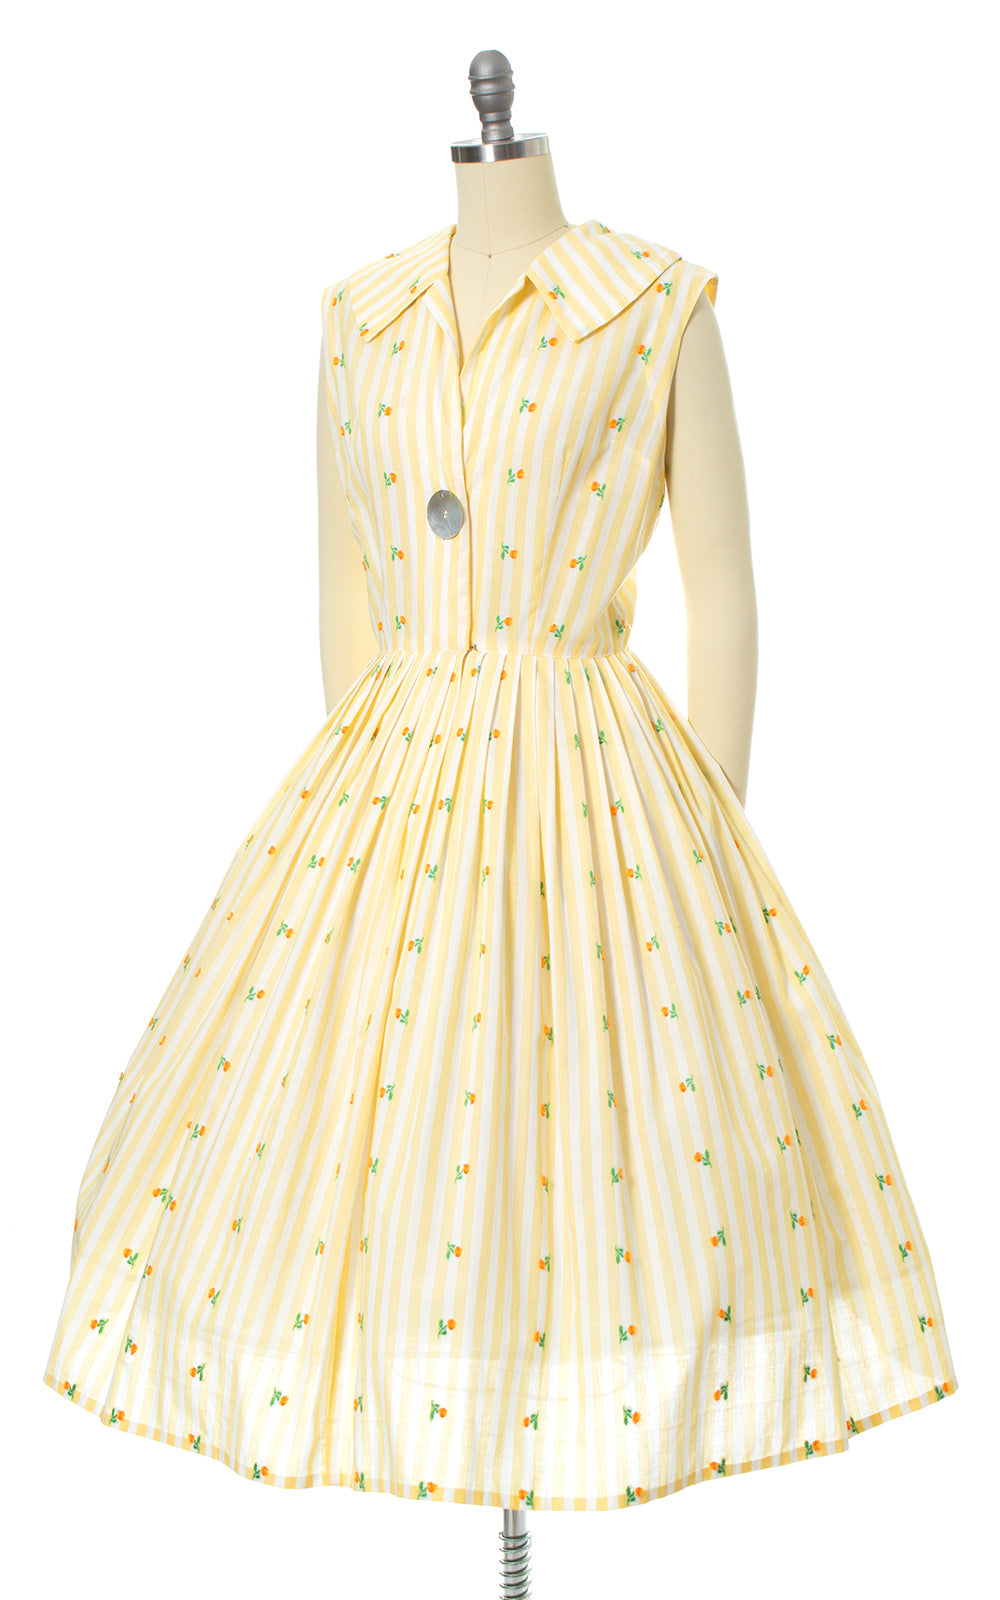 1950s Floral Striped Sundress with Big Abalone Button